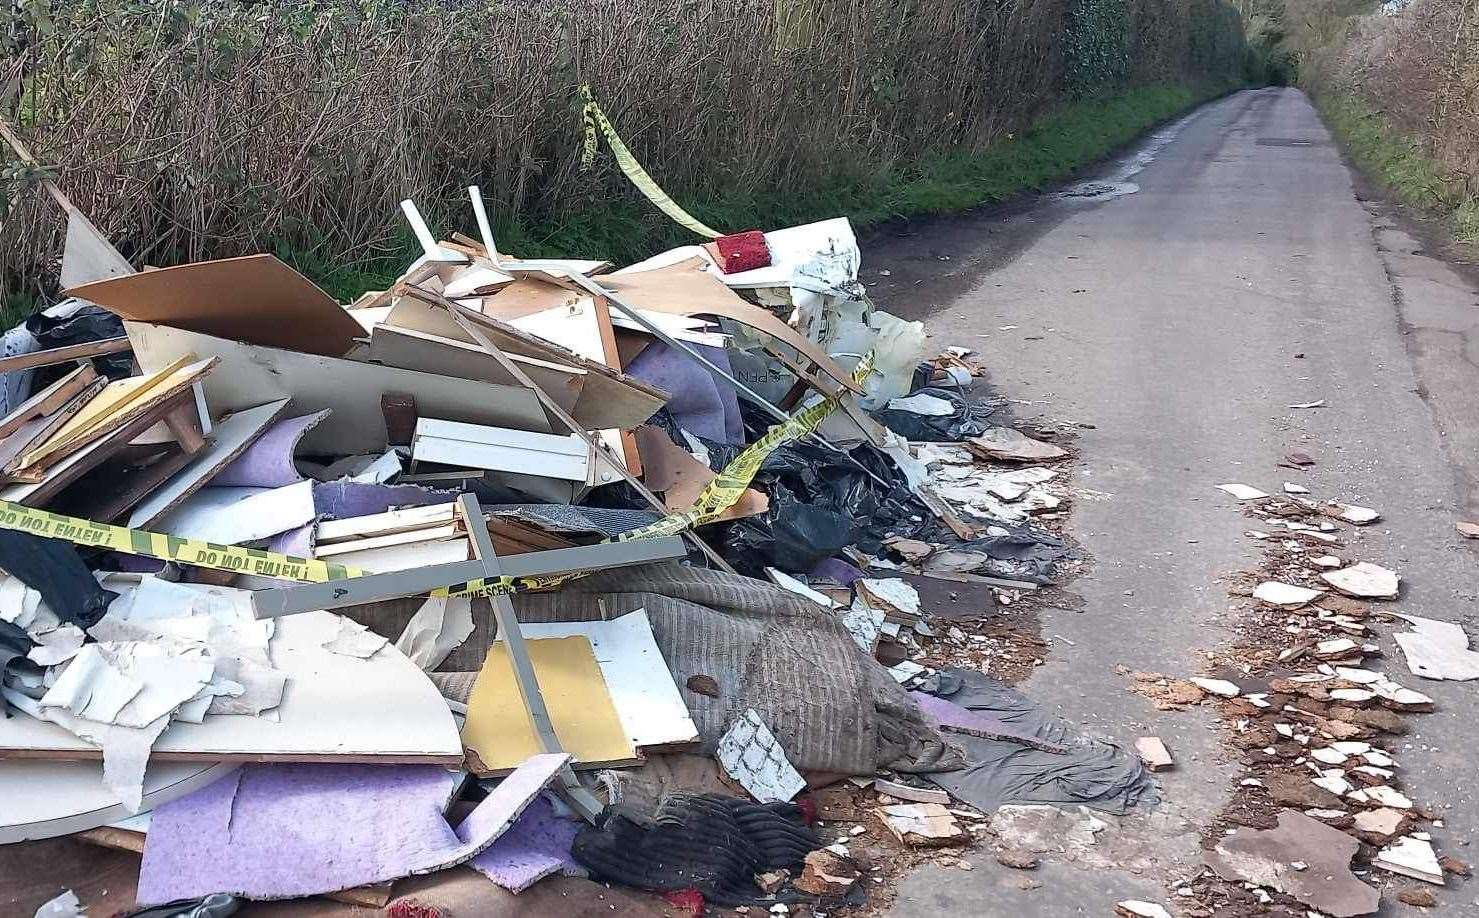 It is understood the waste has been reported to the council. Picture: Martin Deacon